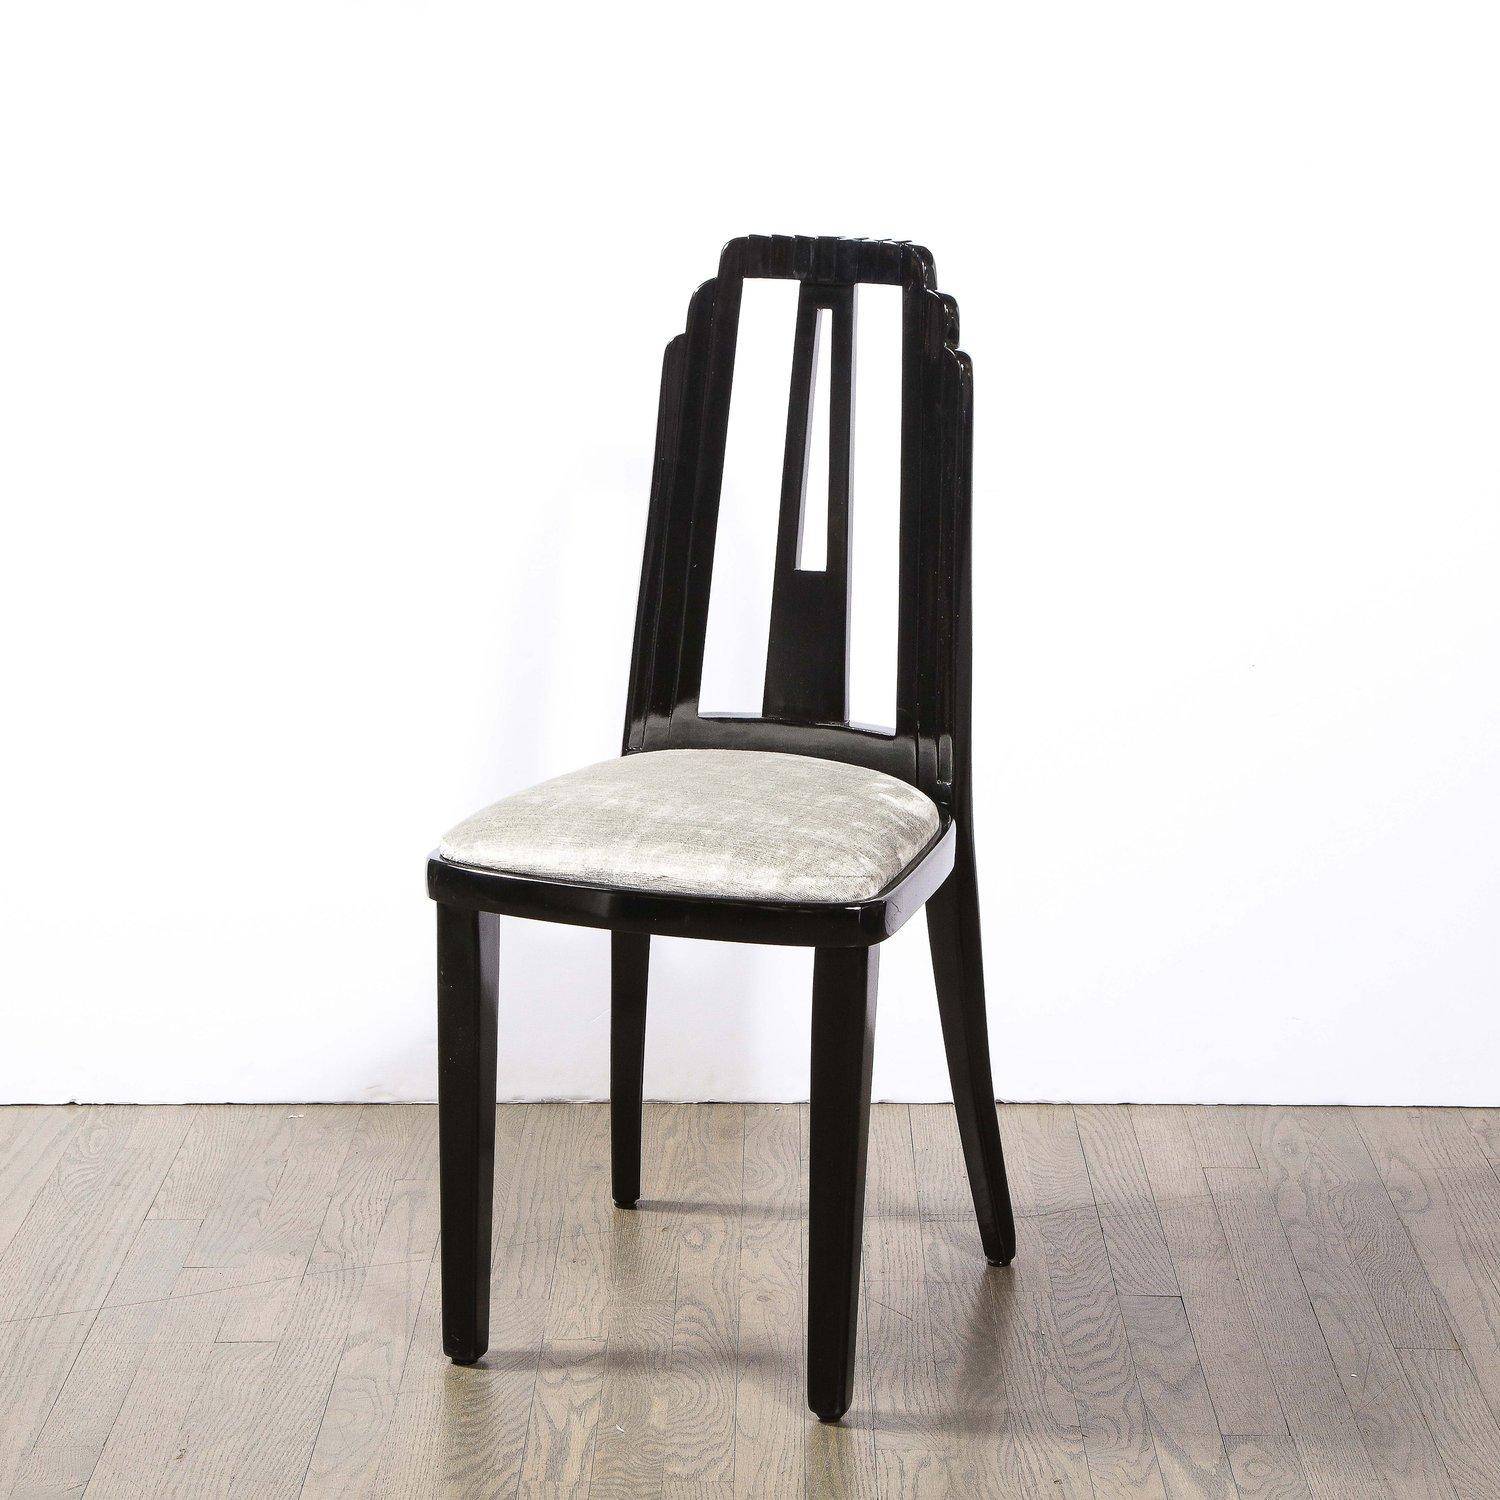 Art Deco Skyscraper Style Dining Chair in Black Lacquer and Smoked Pewter Velvet In Excellent Condition For Sale In New York, NY